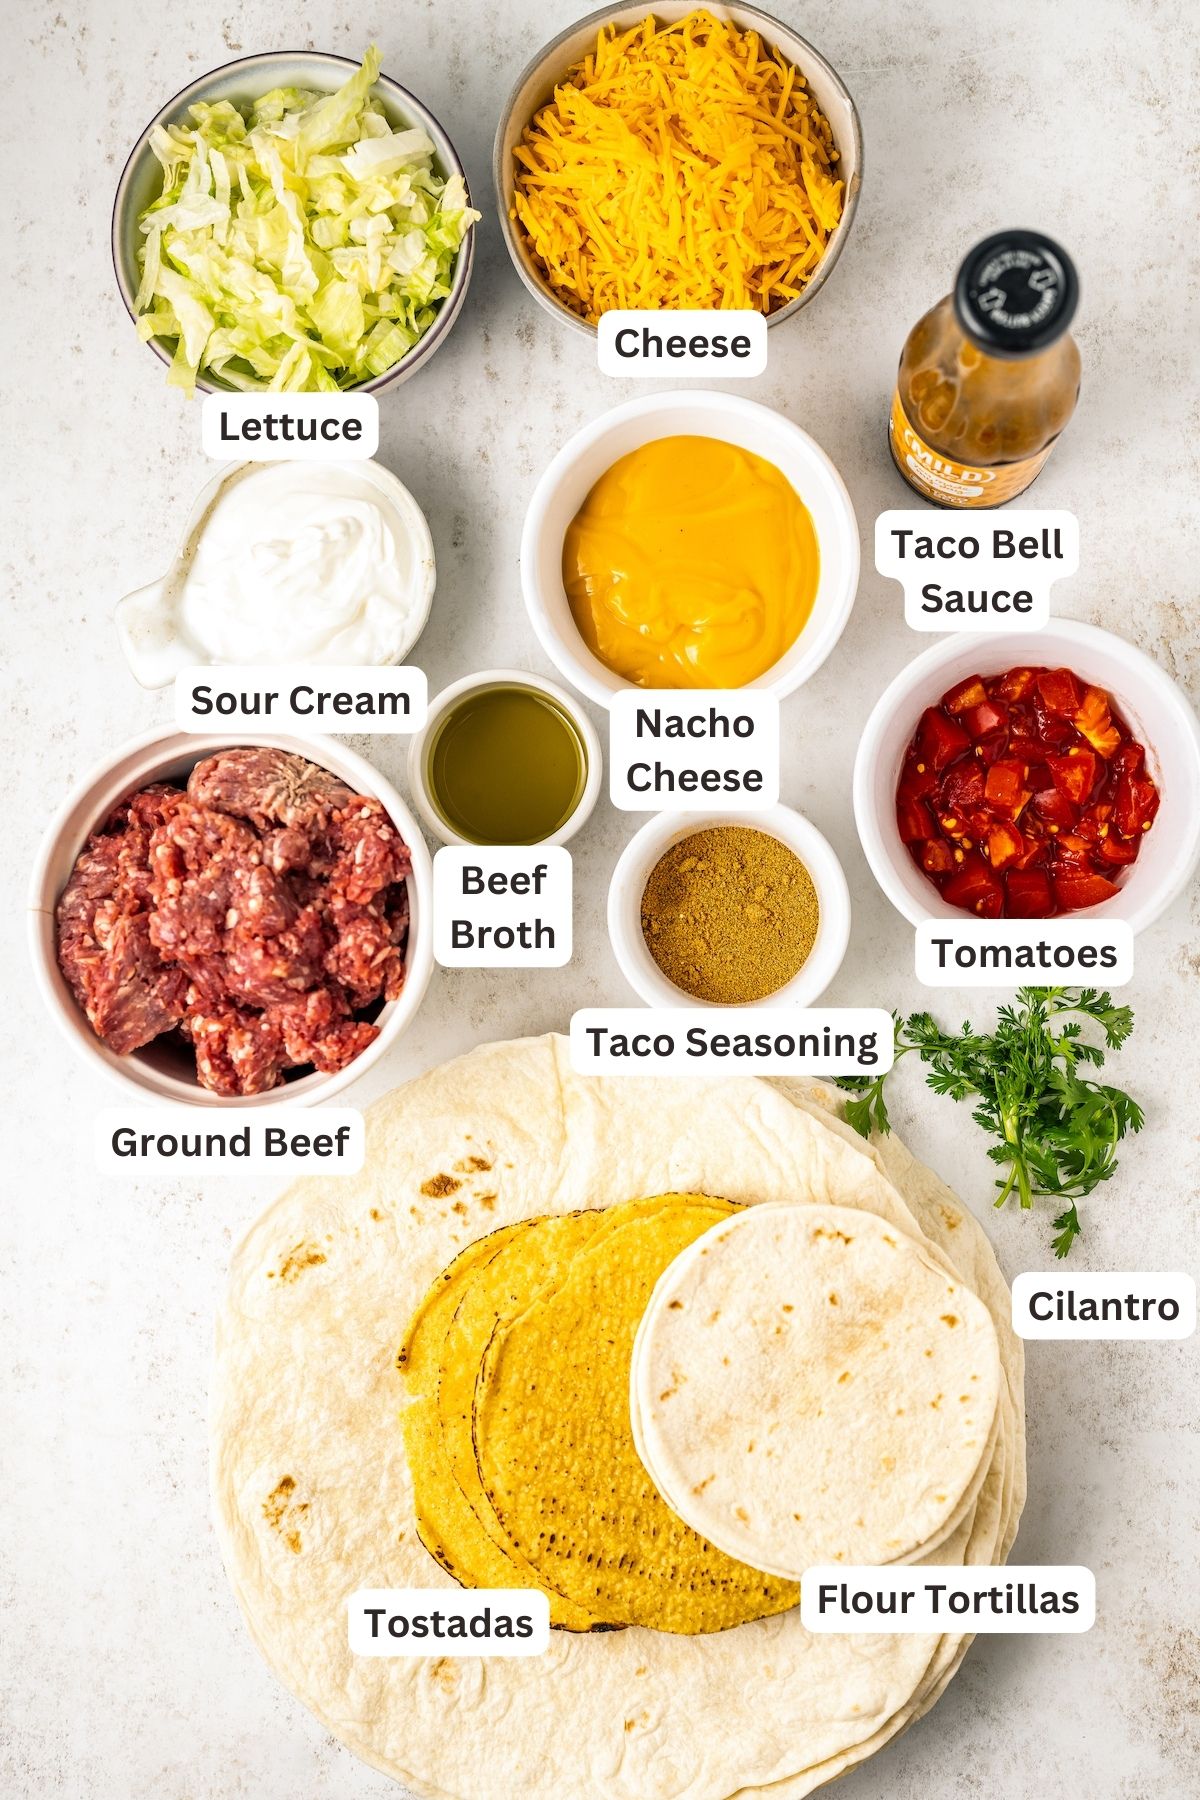 Ingredients for Taco Bell Crunchwrap Supreme Recipe.